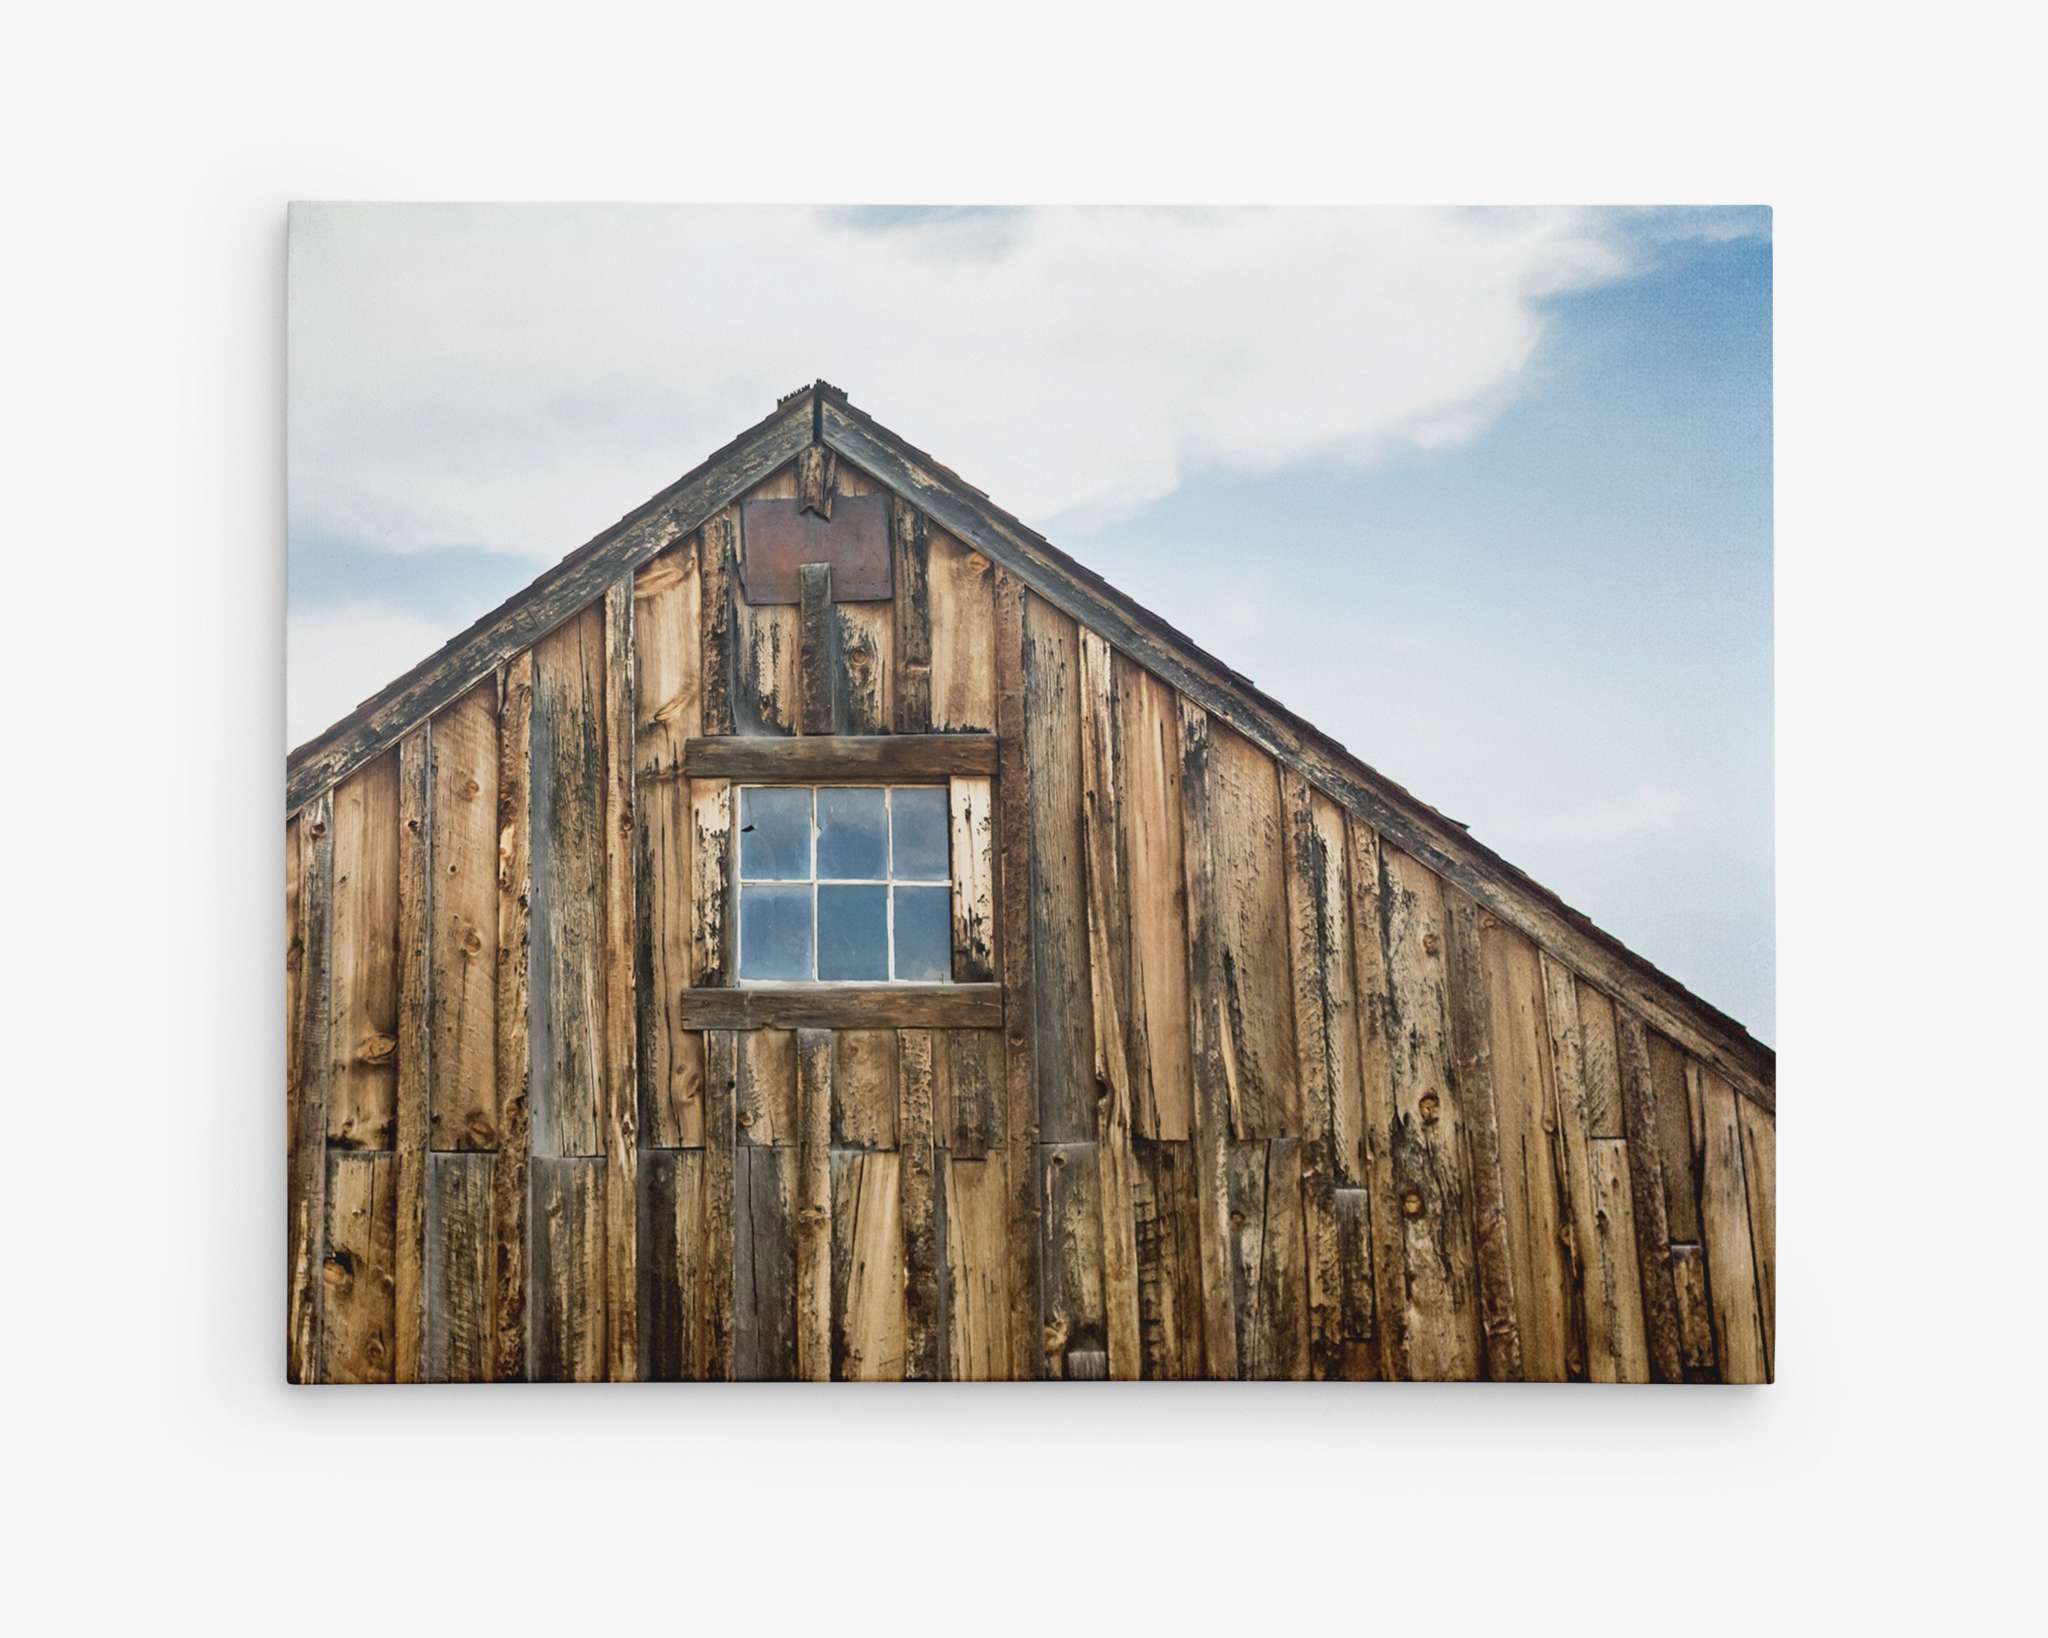 A close-up photograph of the upper portion of a rustic, weathered wooden barn with a single, small window in the center. The sky is partially cloudy in the background, captured beautifully on premium artist-grade canvas. This piece evokes the timeless charm of a rustic farmhouse. Introducing Farmhouse Wall Art, Rustic Barn Decor, 'Old Barn at Bodie' by Offley Green.